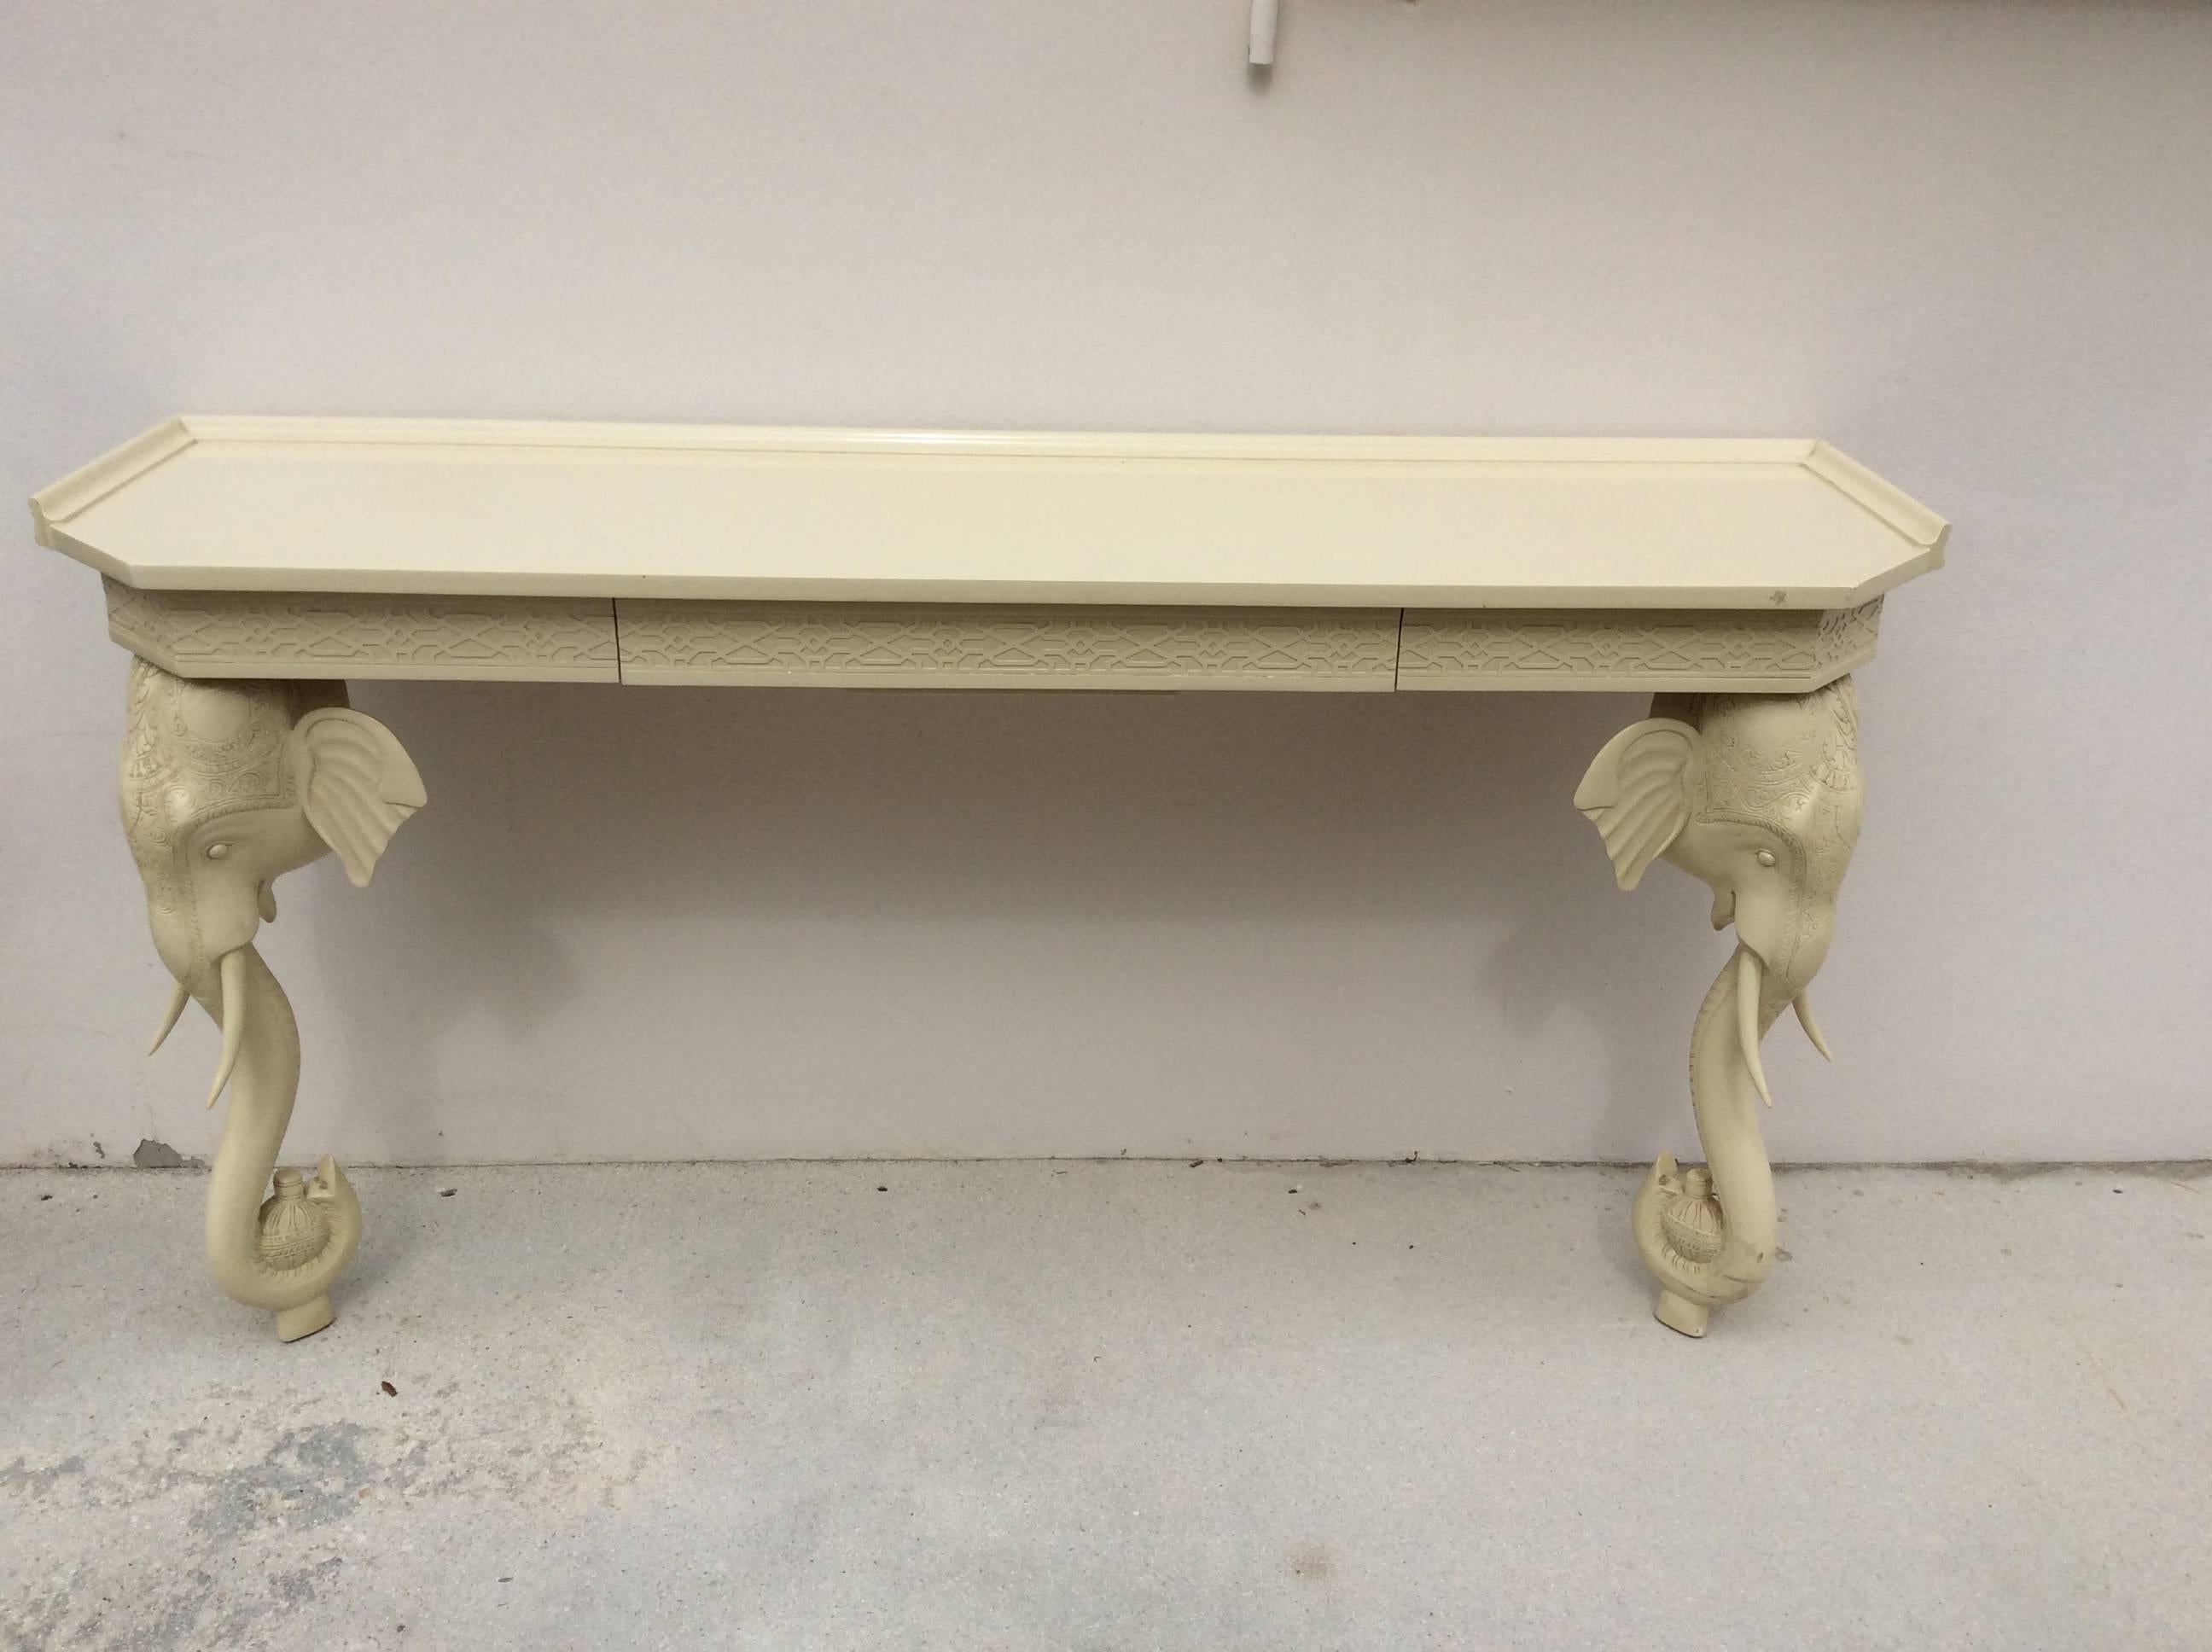 Amazing Newly Lacquered white gloss vintage Gampel and Stoll elephant fret work console table or desk, wall mount. Front drawer for storage. Price includes professional lacquer color of buyers choice. This is the same console table that is in Elvis